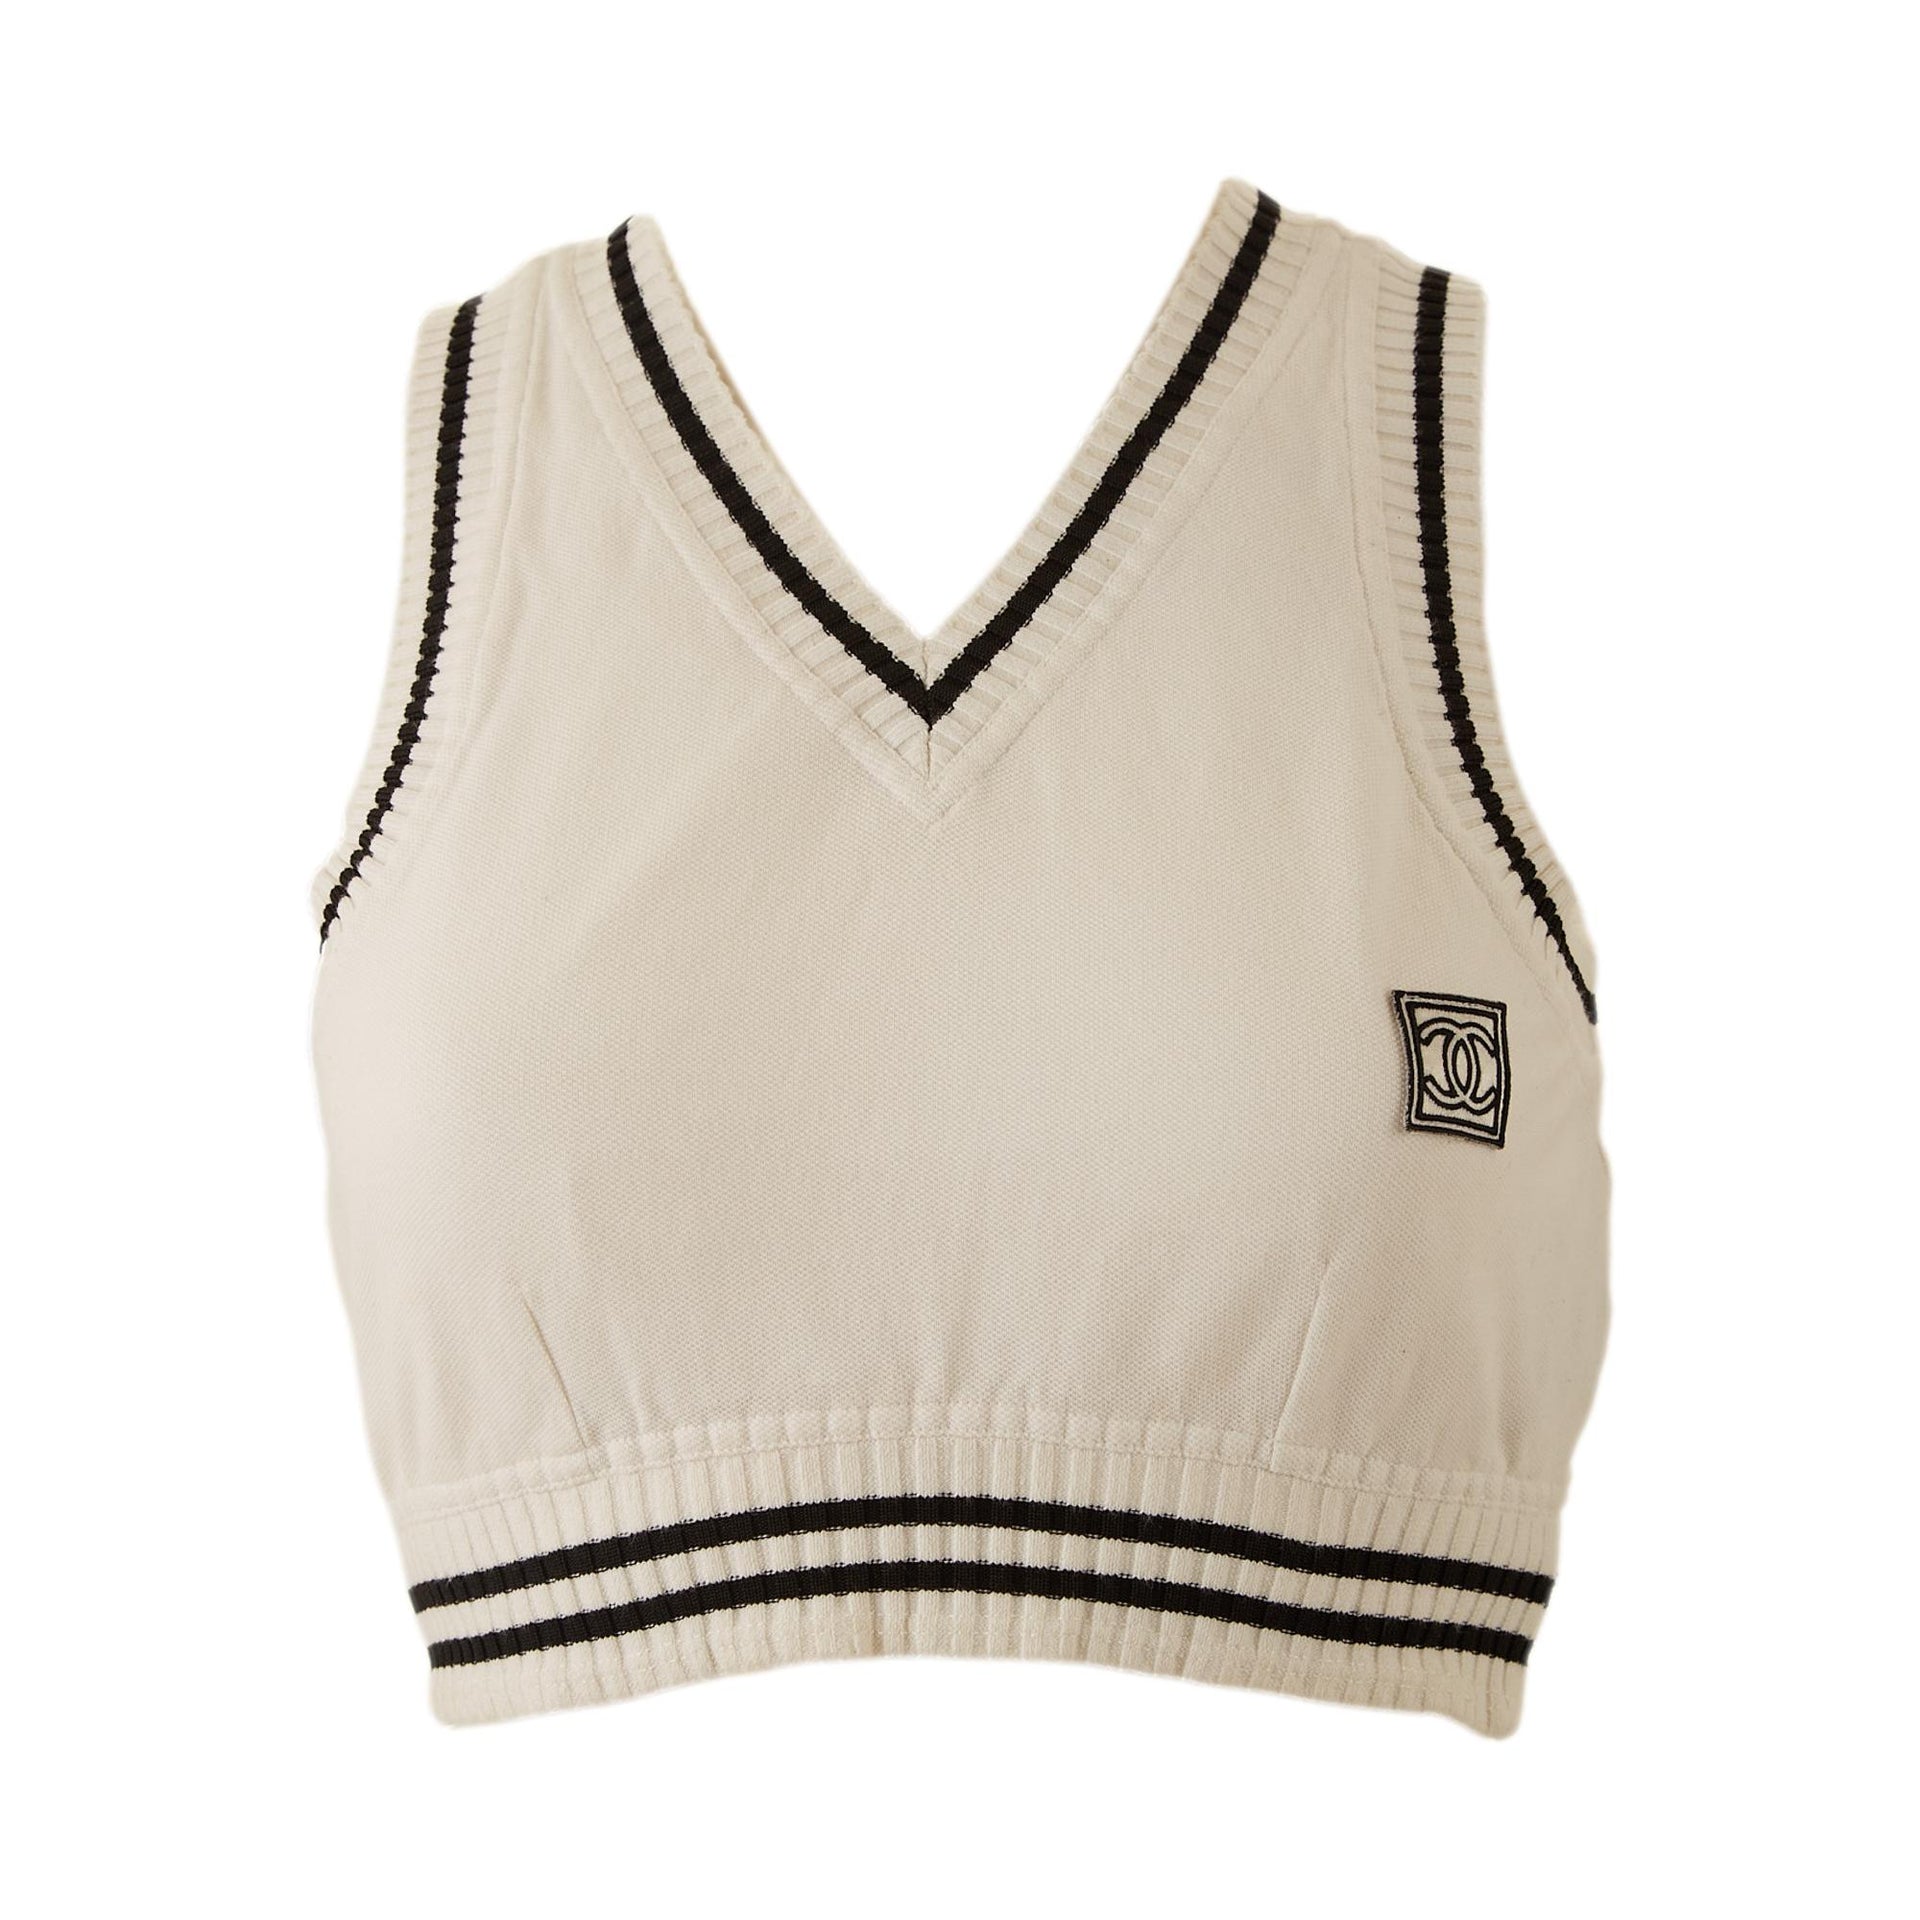 Chanel 2022 Logo Crop Top - White Tops, Clothing - CHA798514